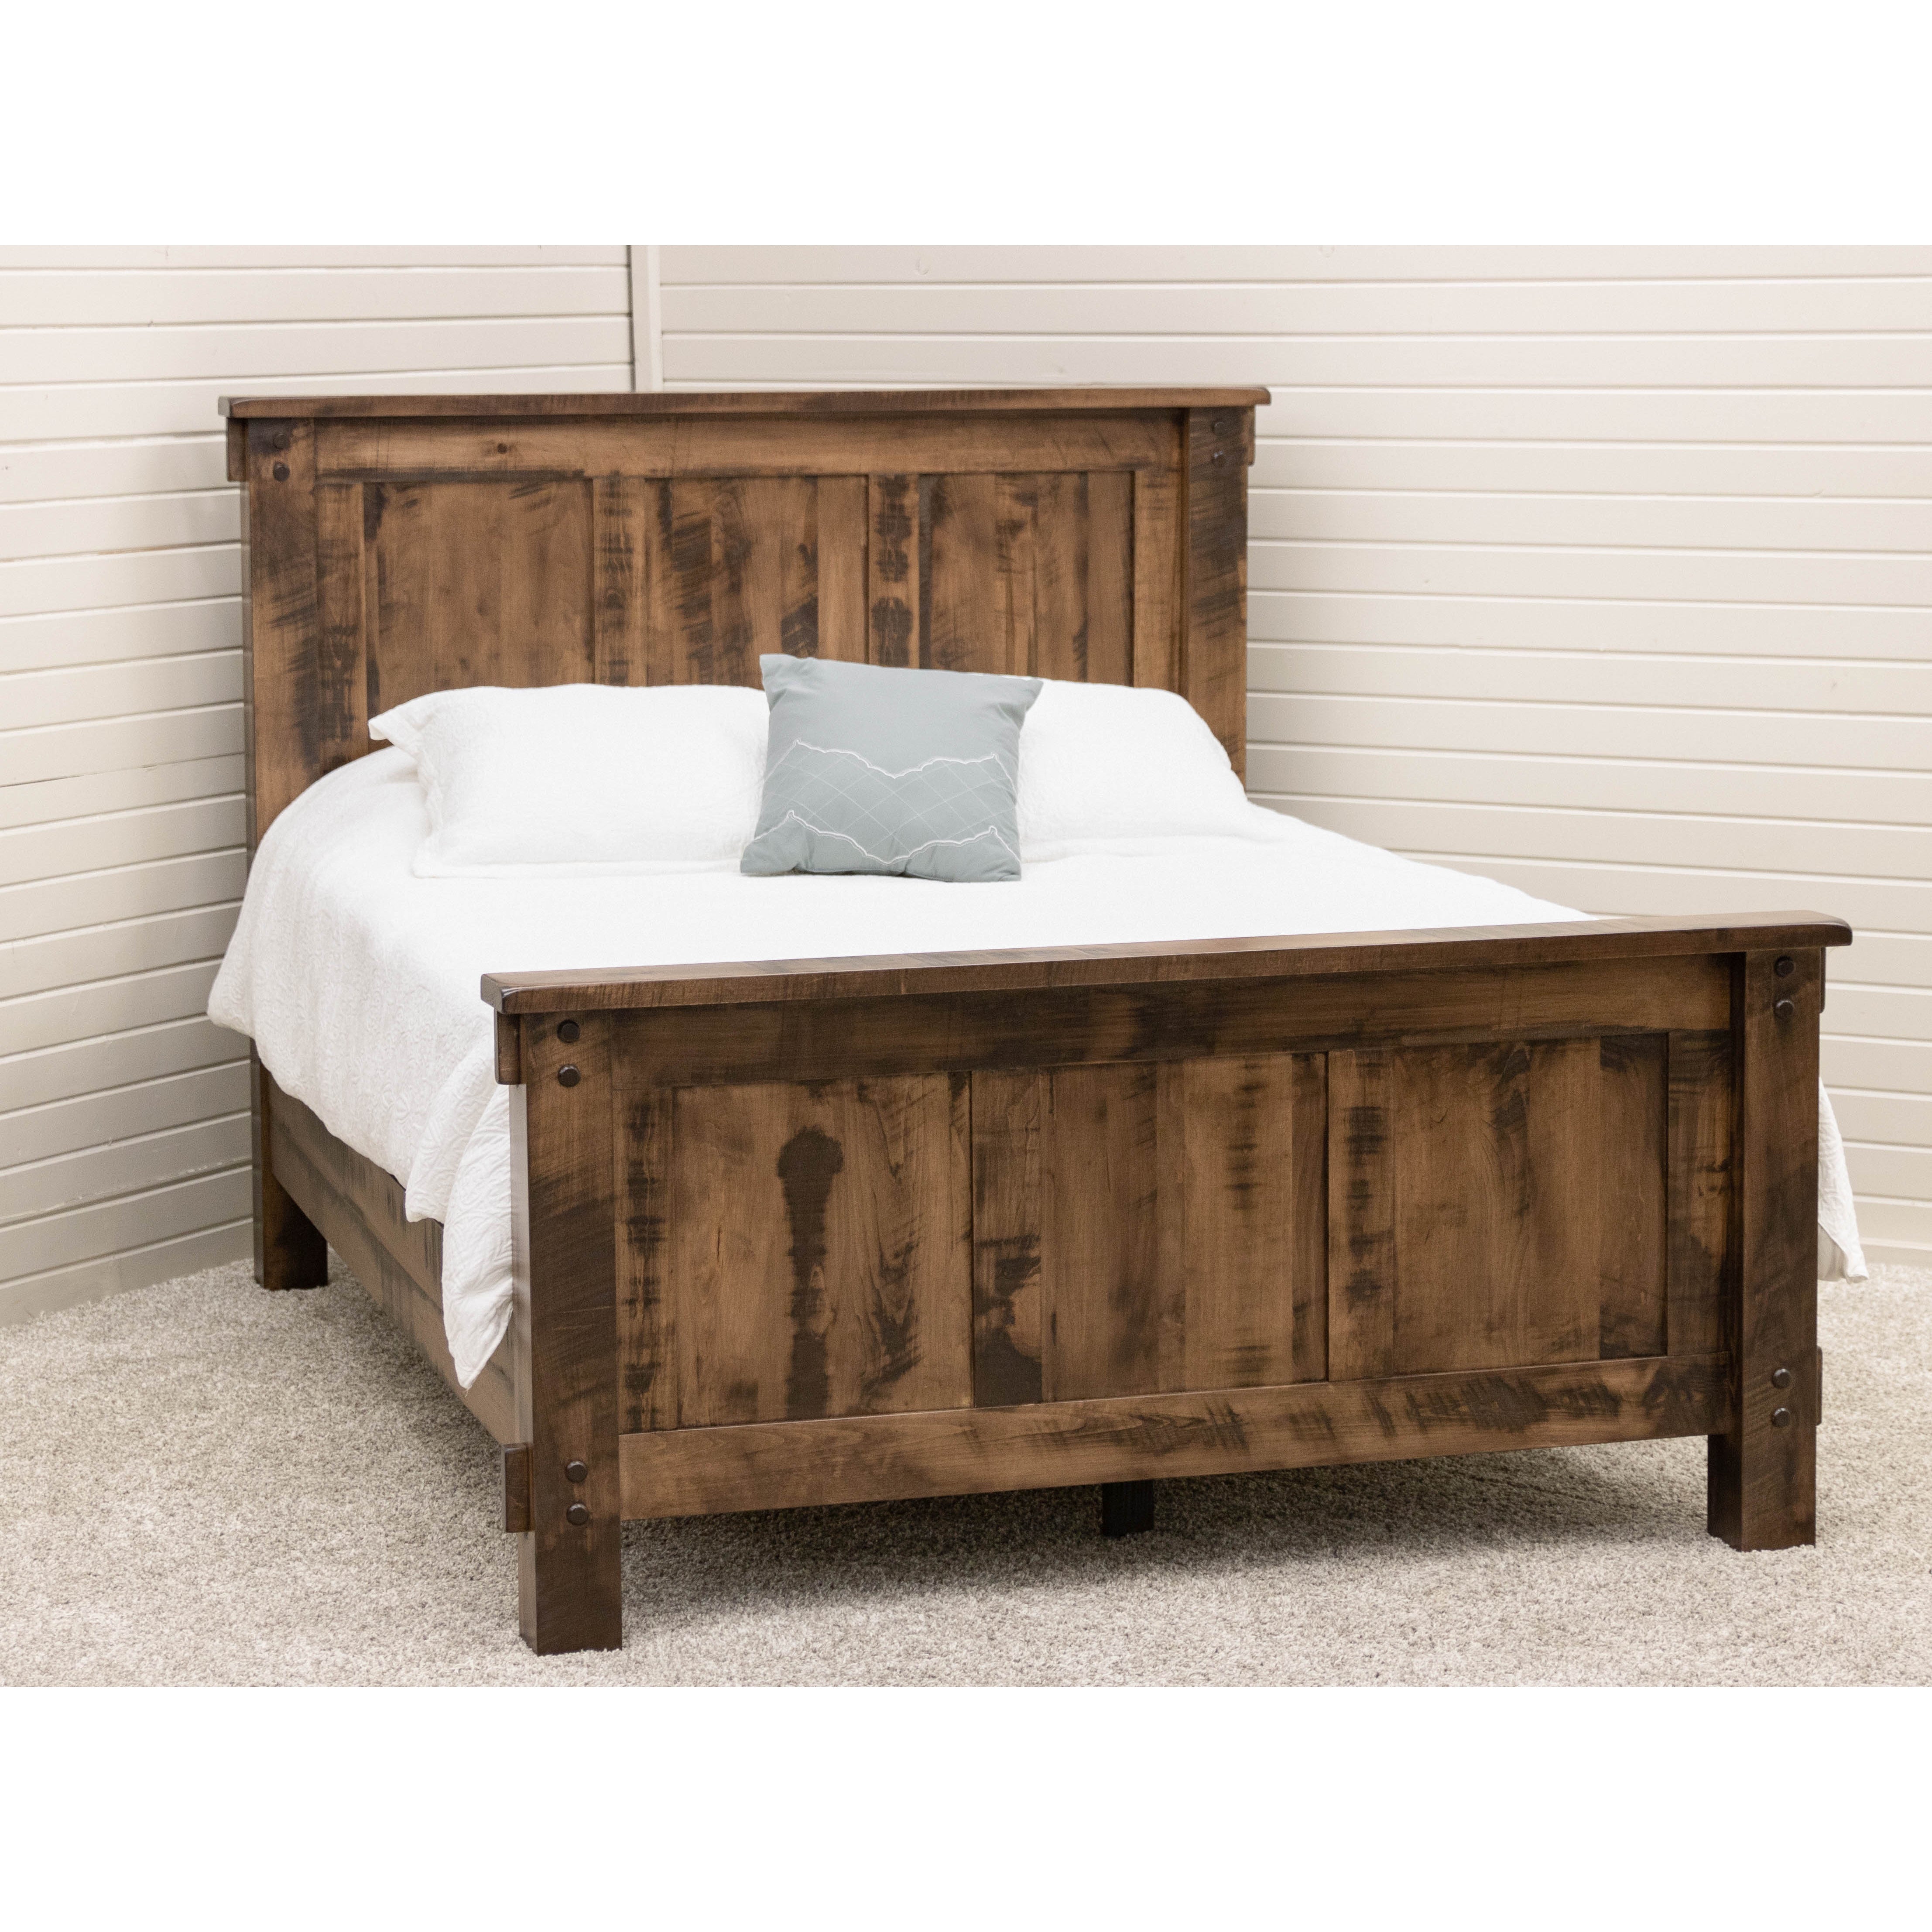 DCF Roughsawn Panel Bed with Straight Headboard